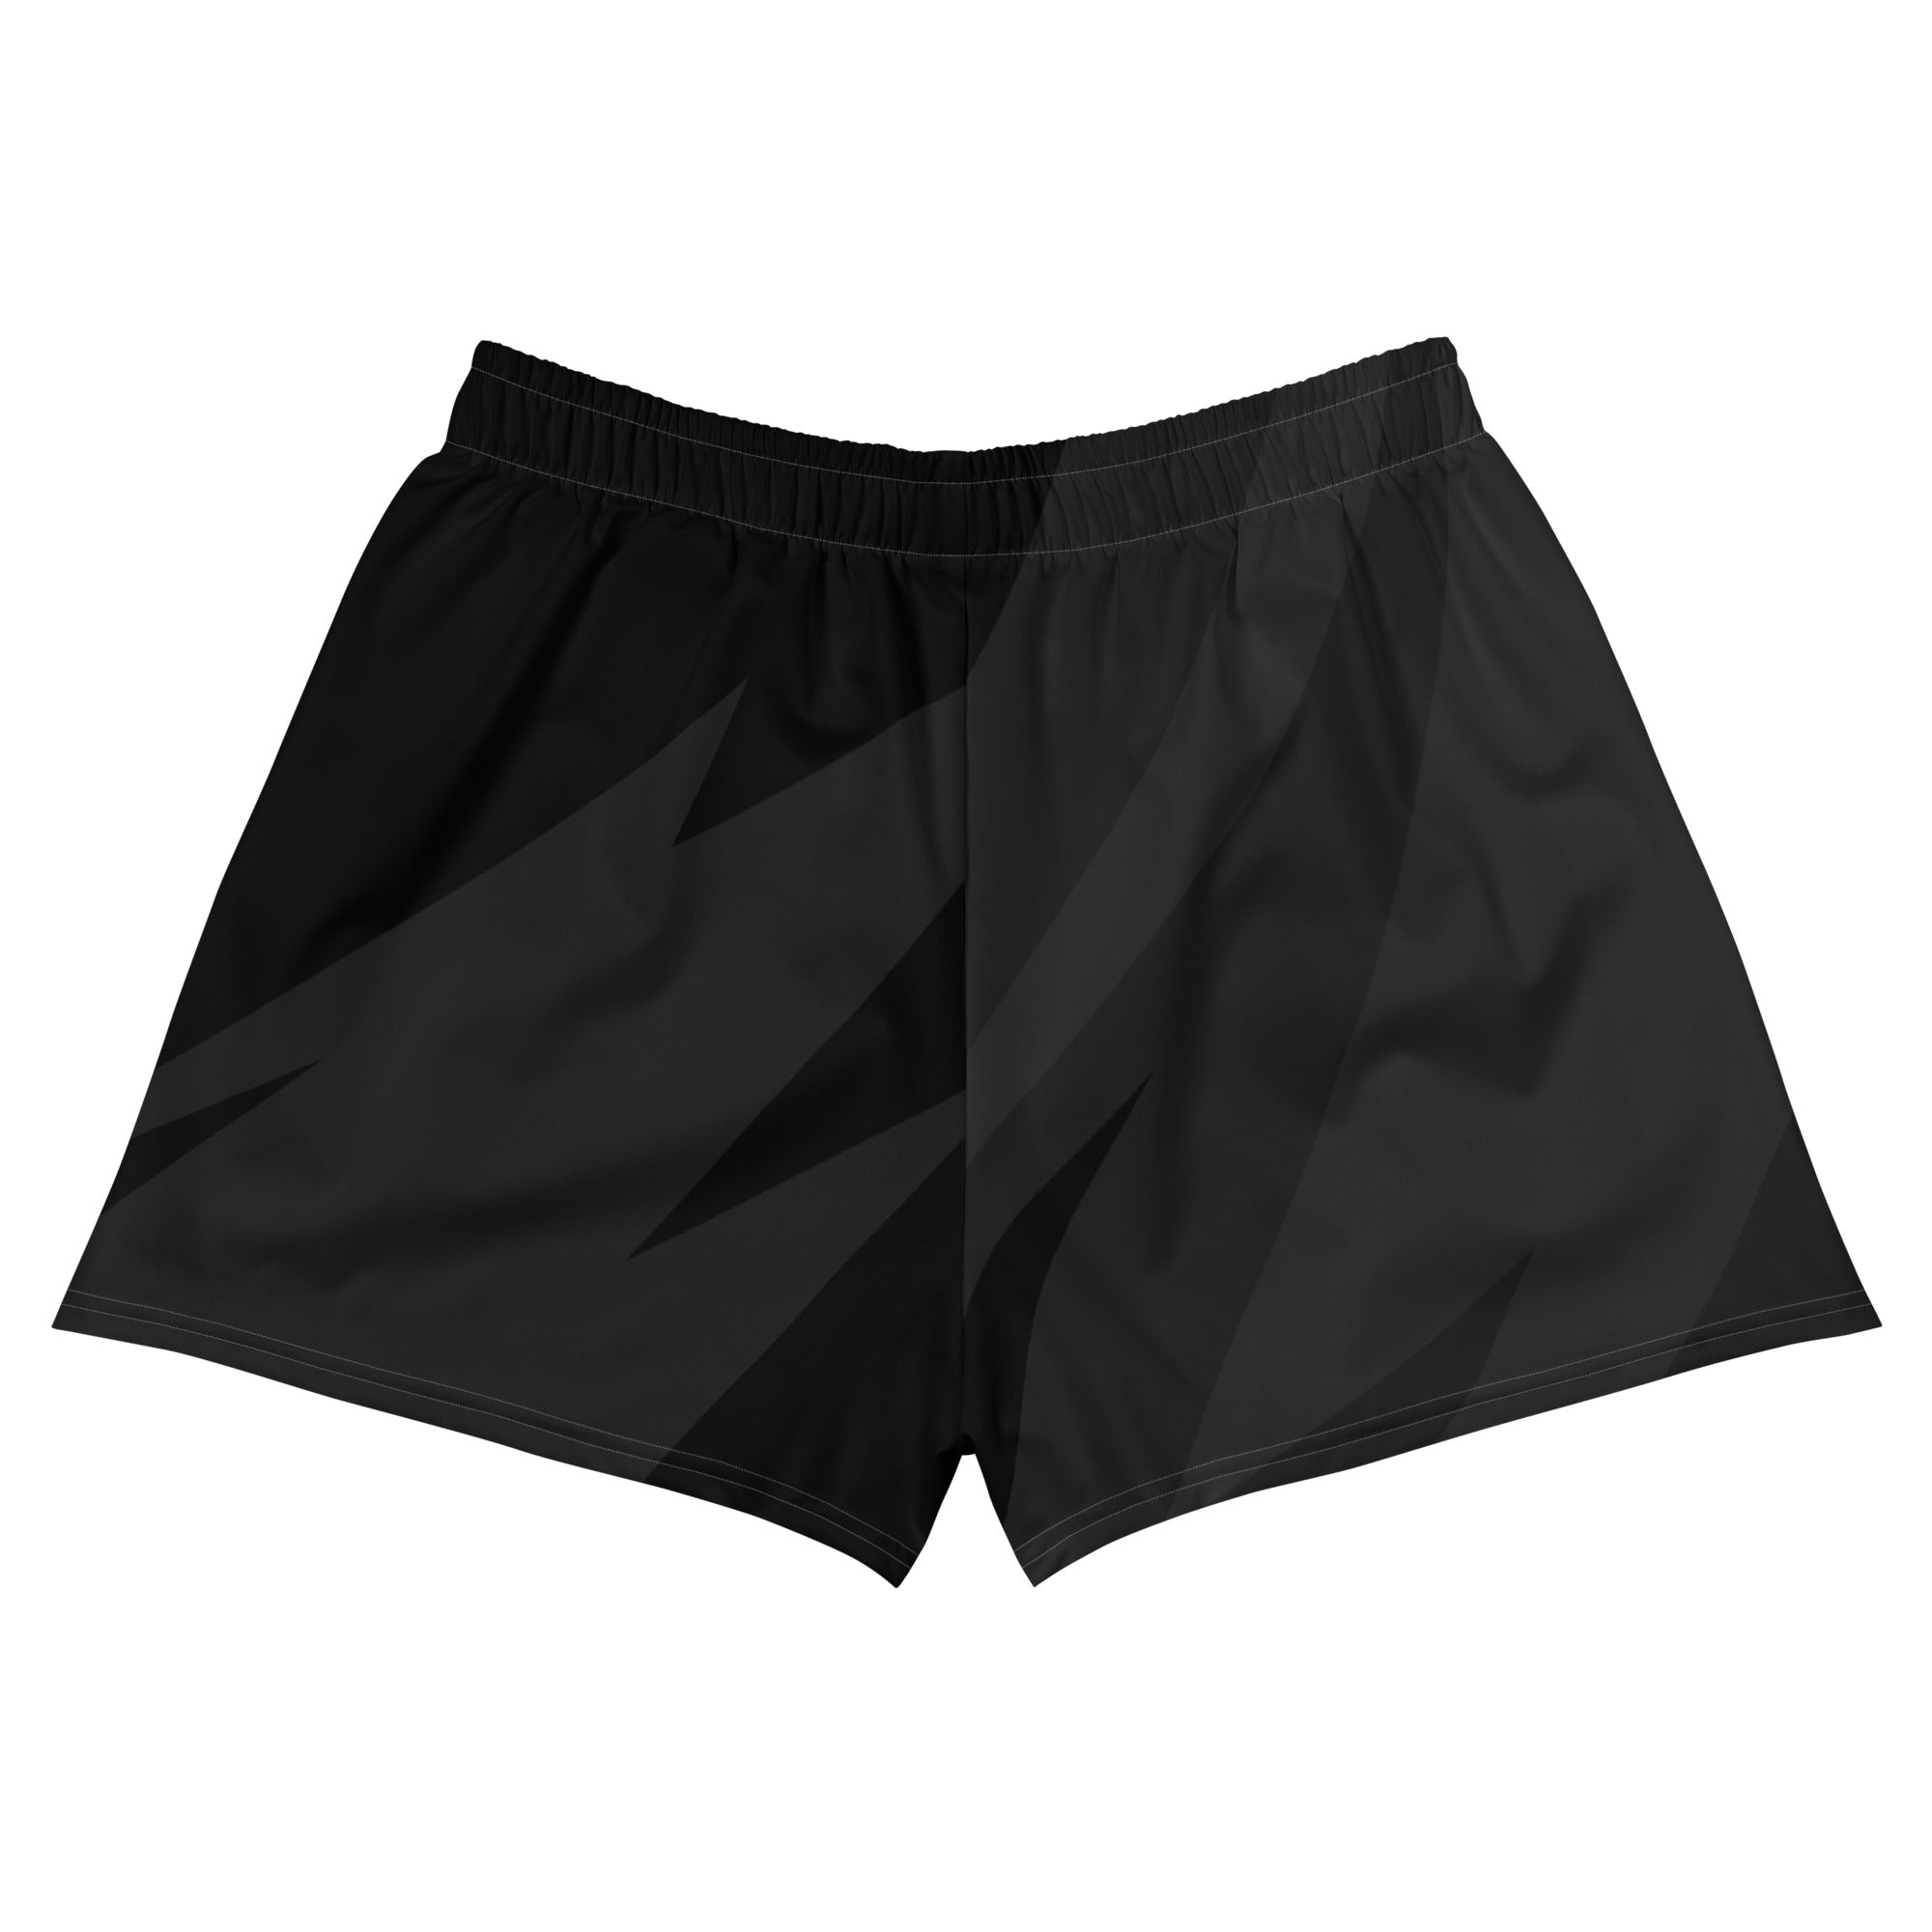 Coral Reef Women’s Athletic Shorts